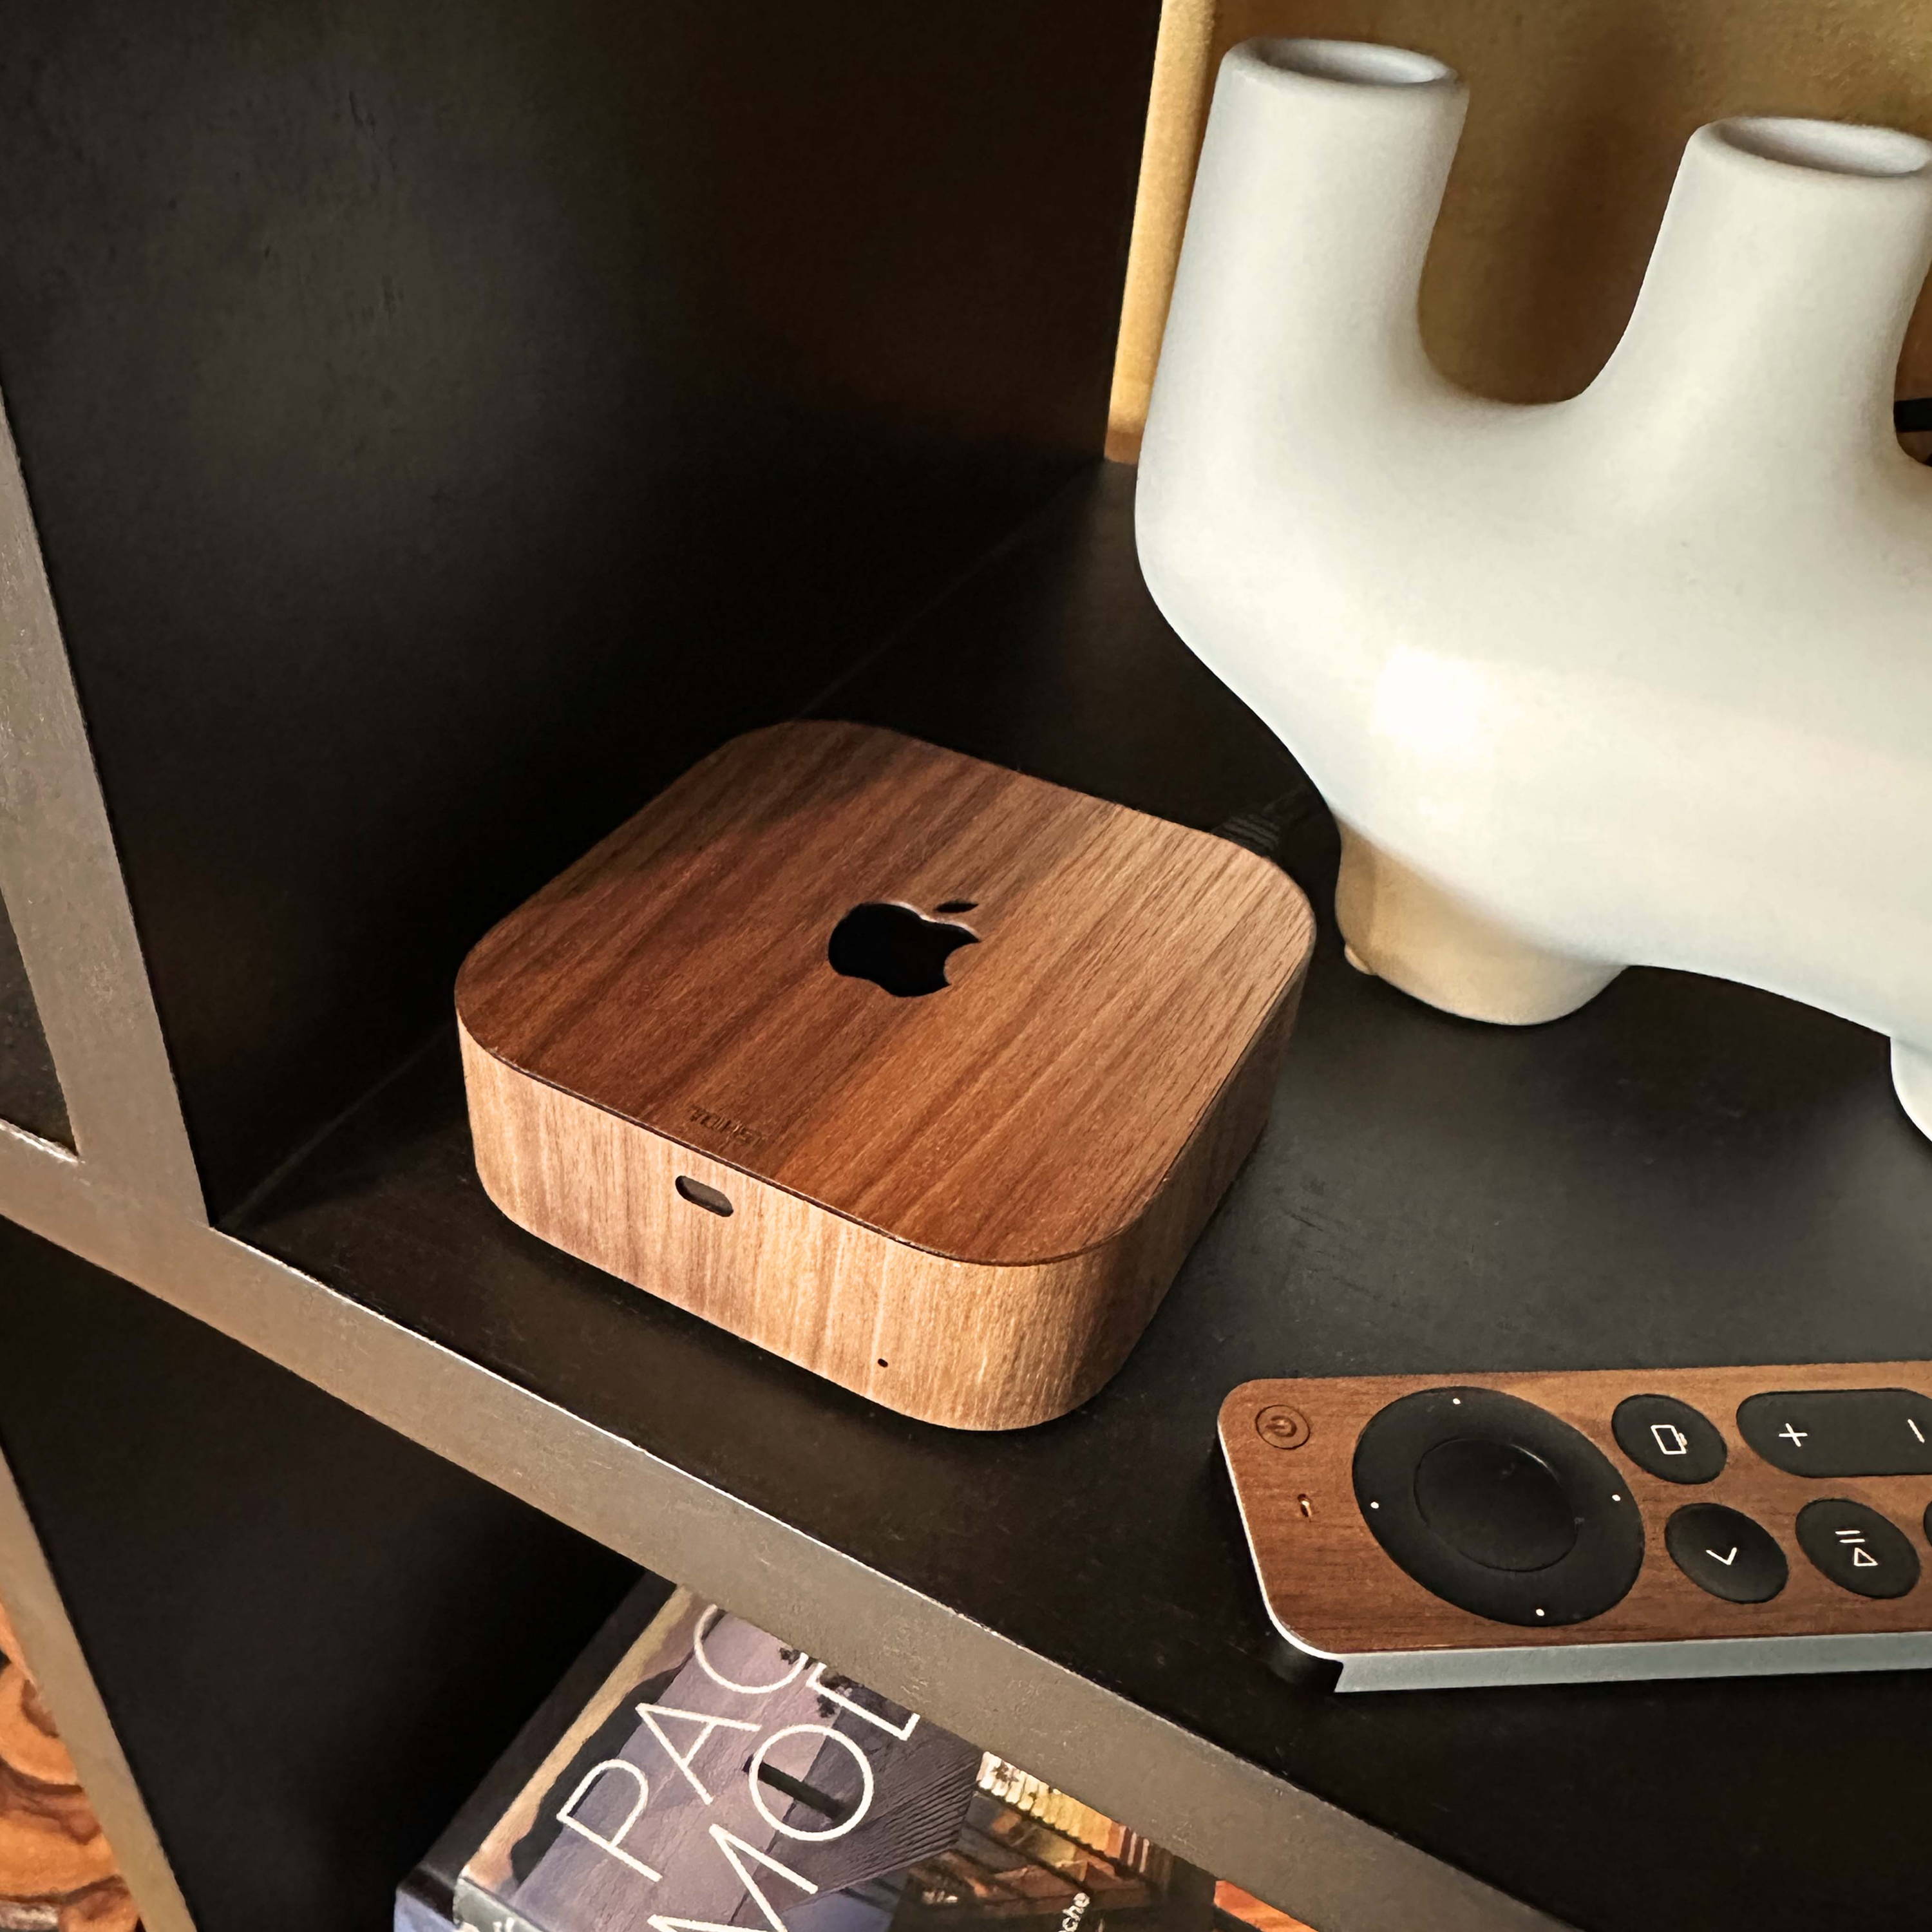 Toast real wood covers for Apple TV.